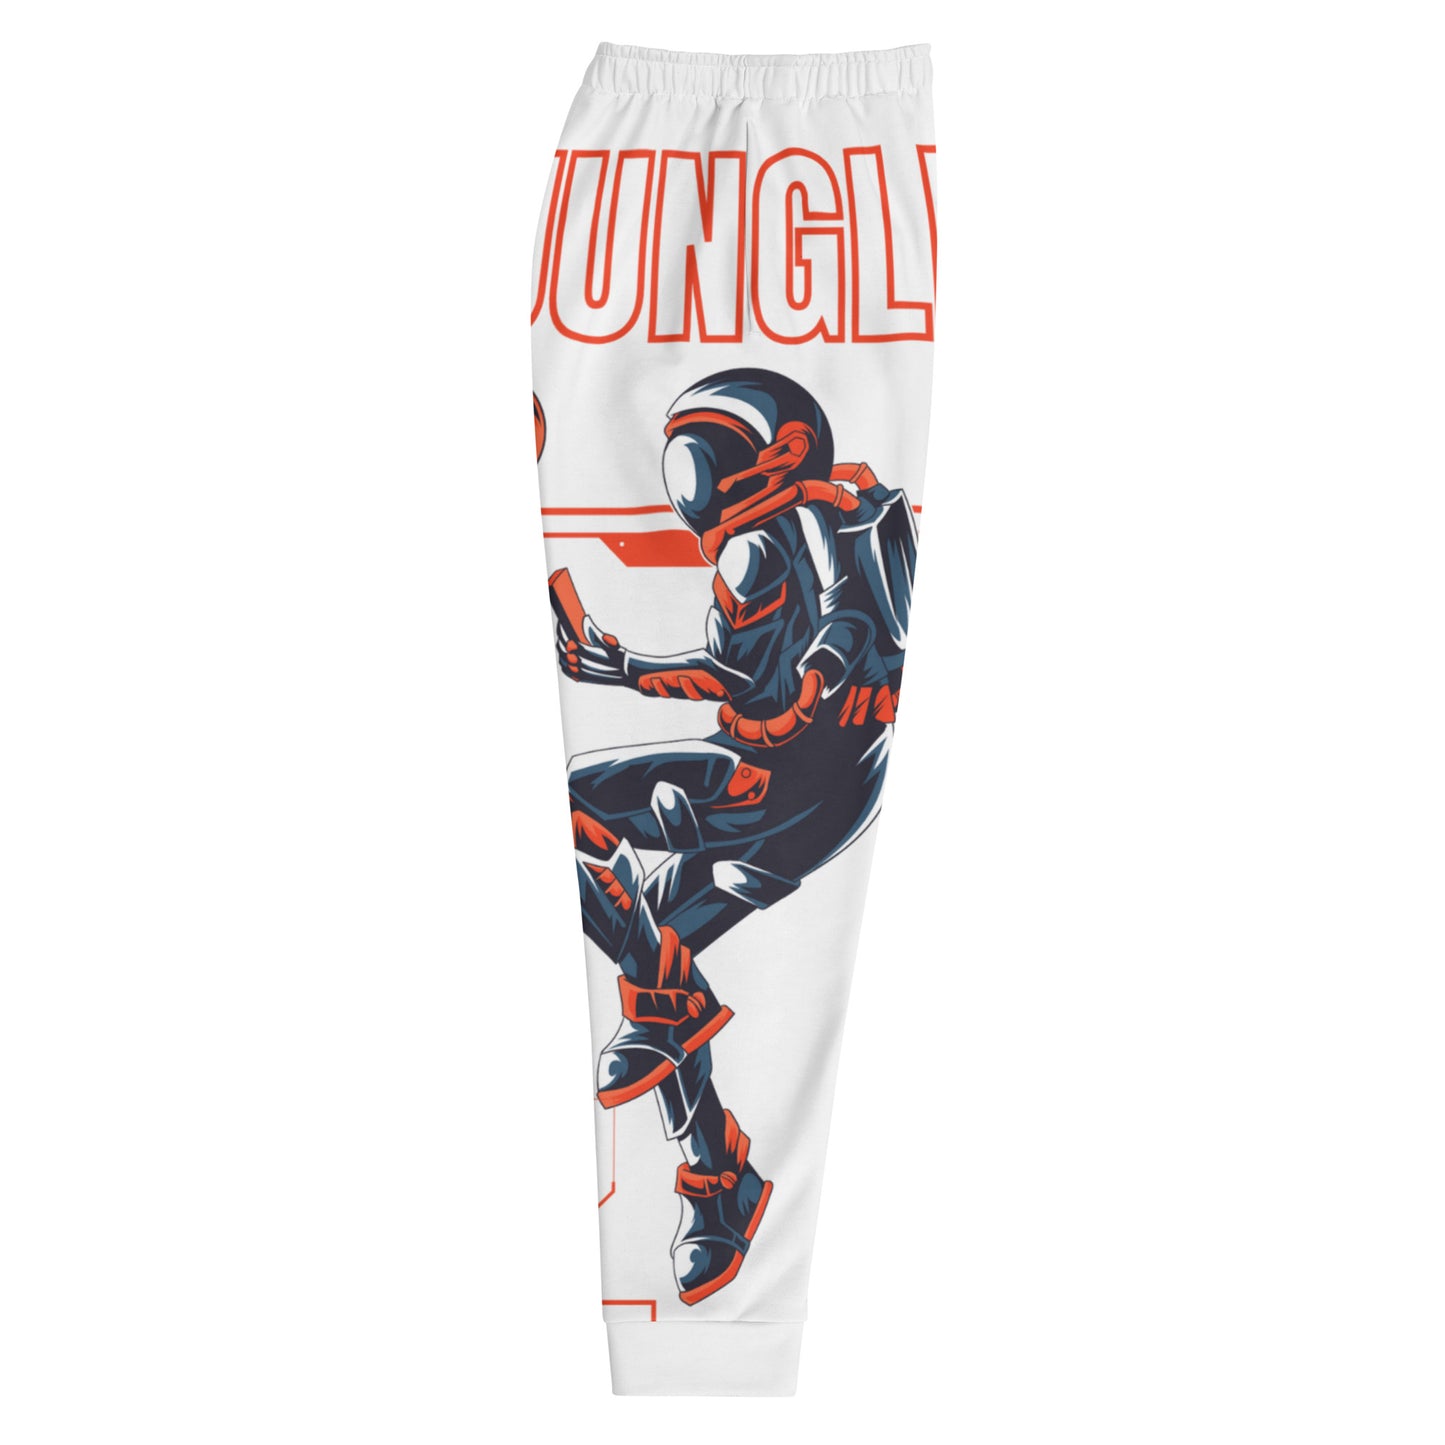 Men's red space Joggers